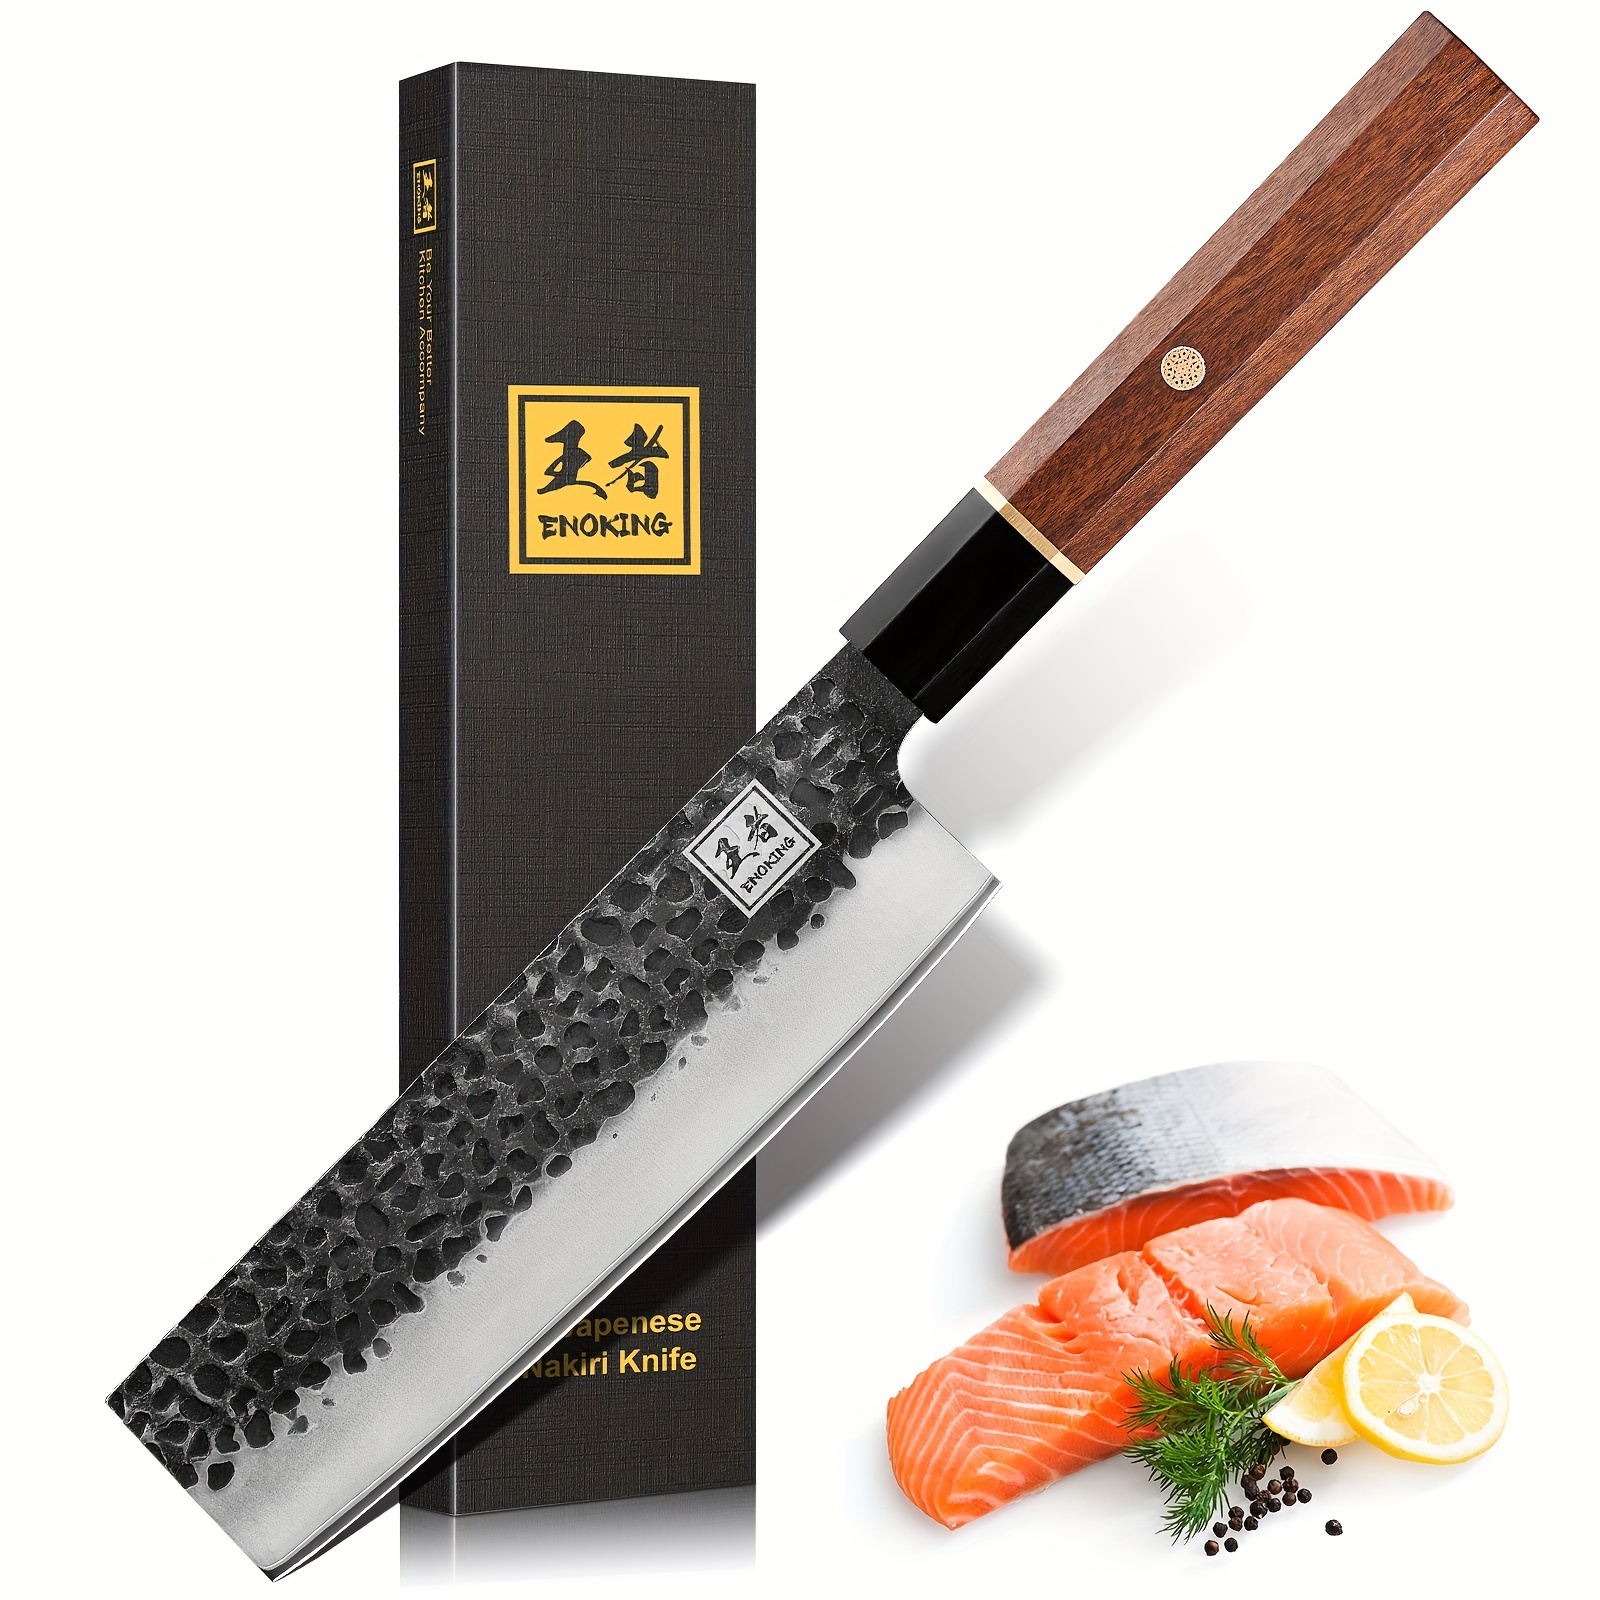 

Enoking Japanese Nakiri Chef Knife 7 Inch, Professional Nakiri Knife Hand Forged Vegetable Kitchen Knife, 5 Layers 9cr18mov Clad Steel Chopping Knife With Rosewood Handle And Gift Box